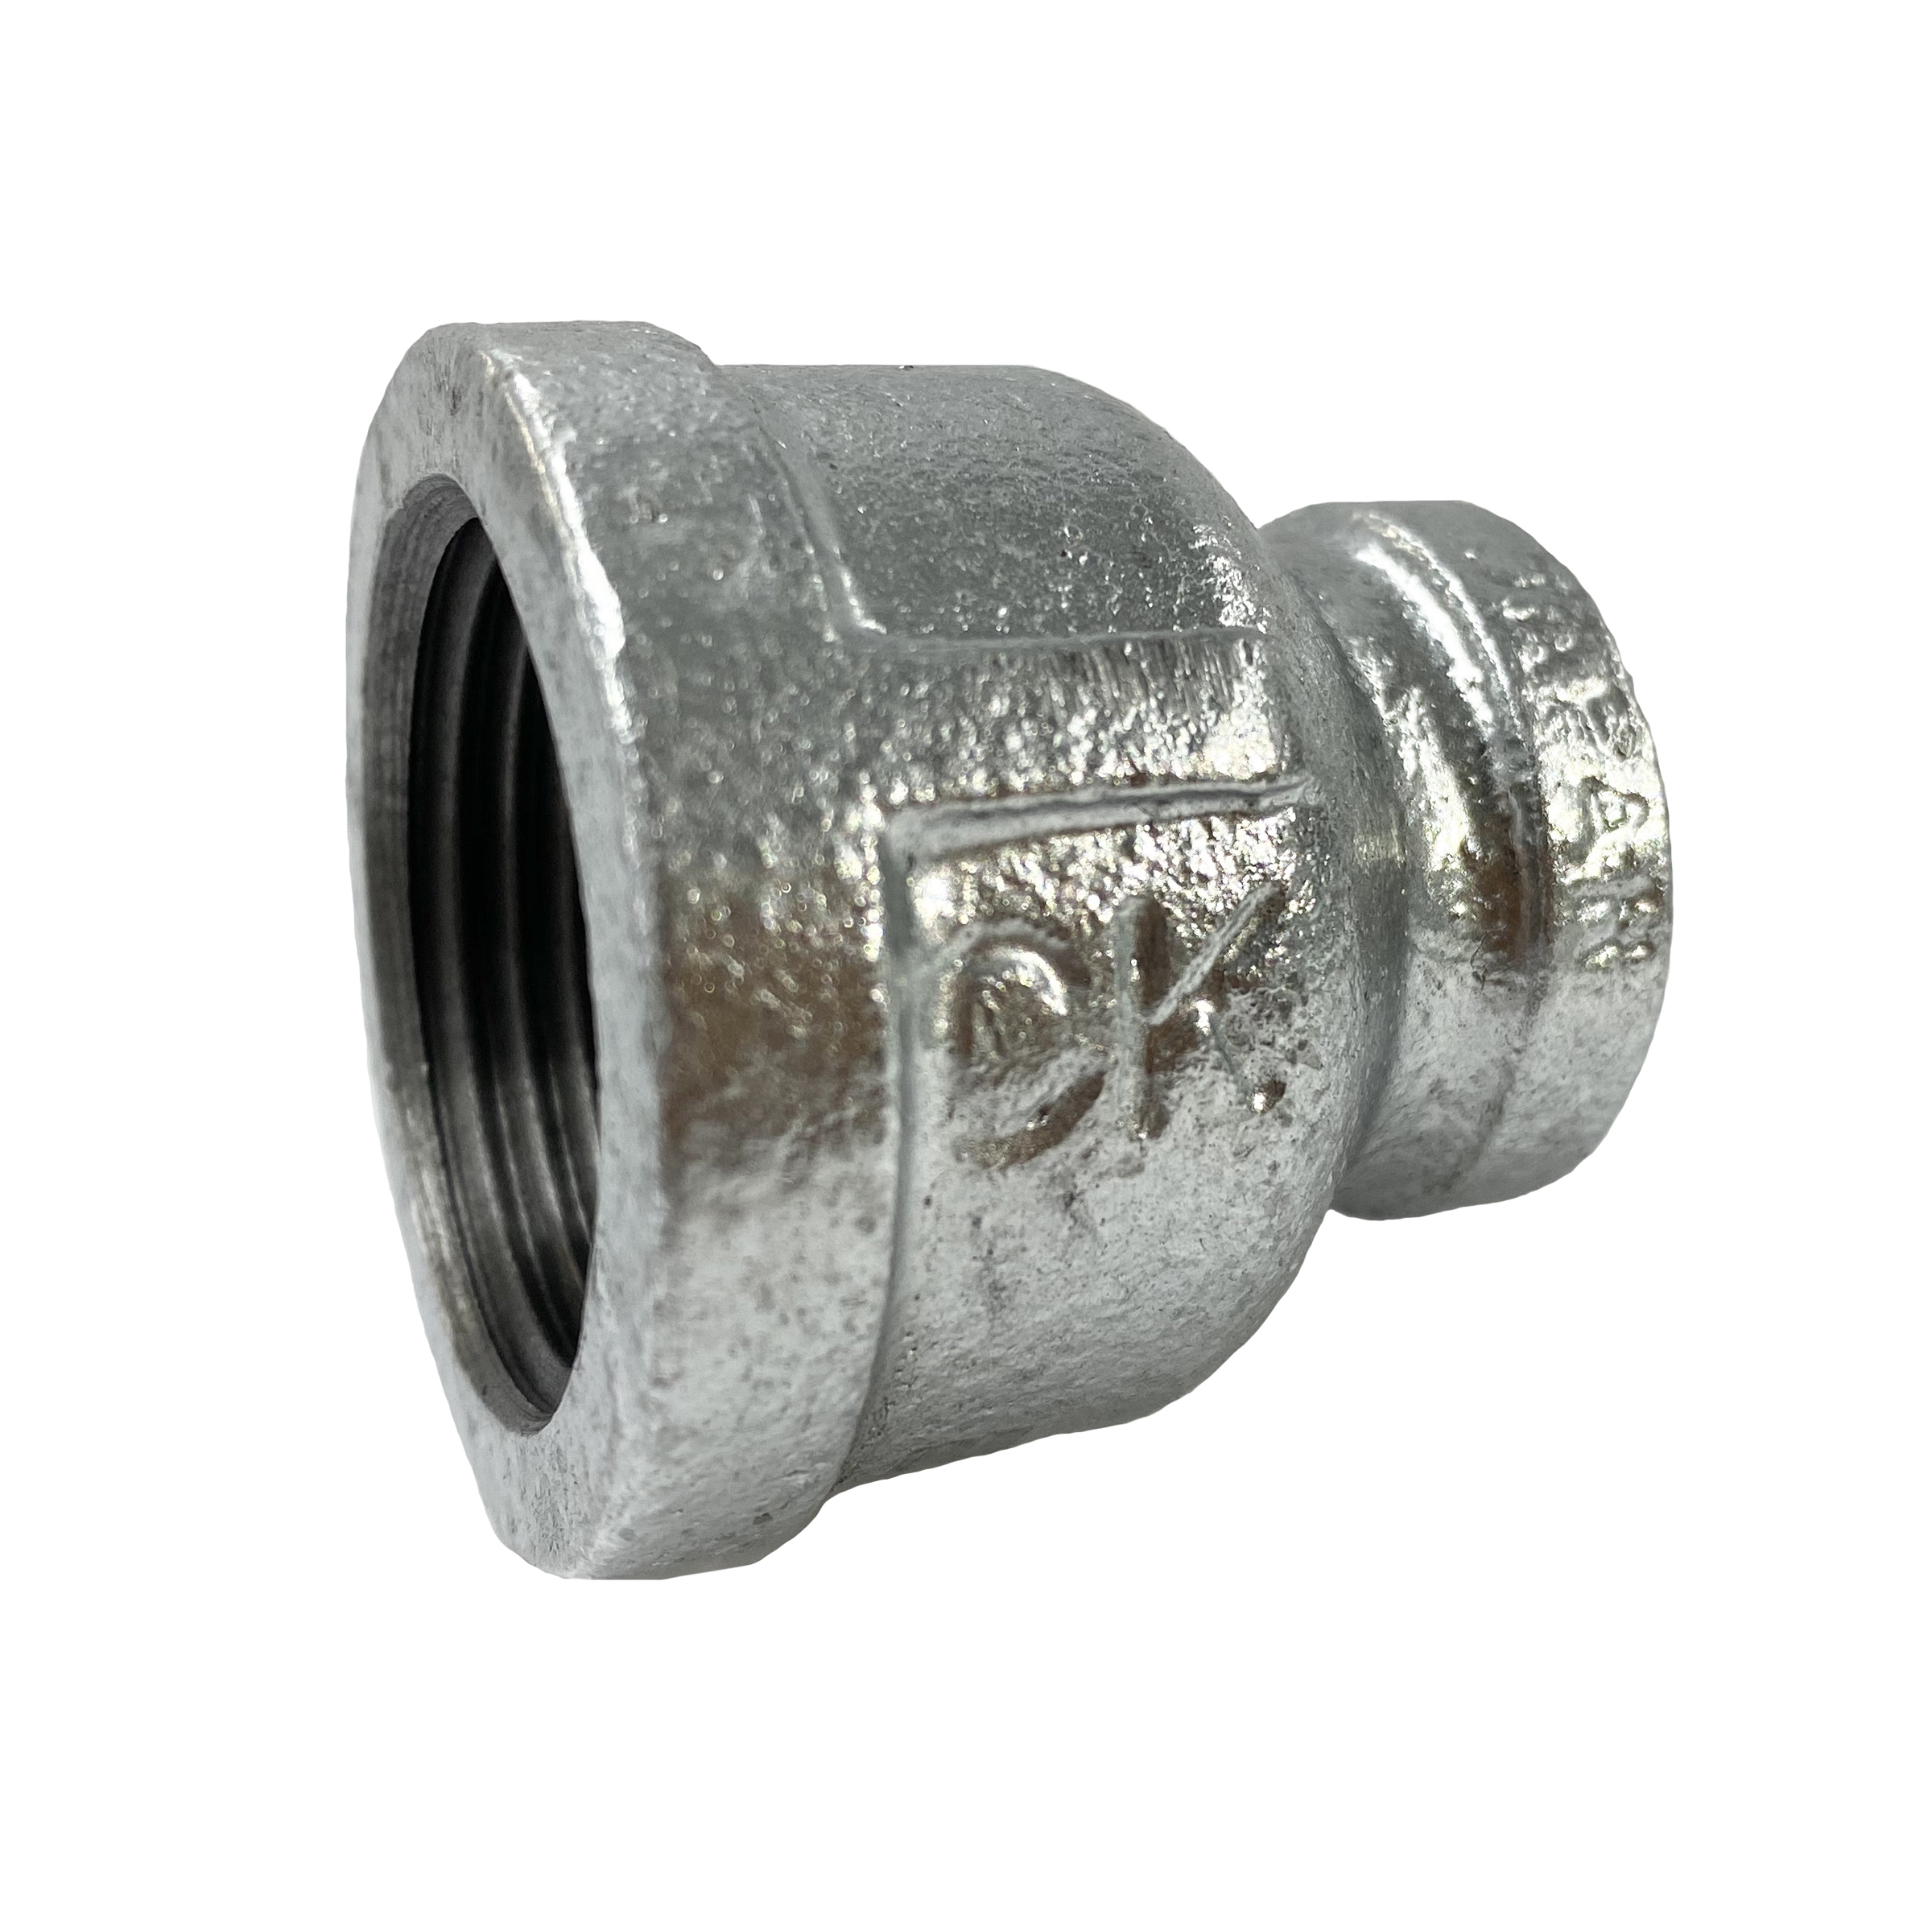 CK Fittings - Screw-in Type Malleable Cast Iron Pipe Fitting - Socket with Different Diameters with Band BRS-32X15-W